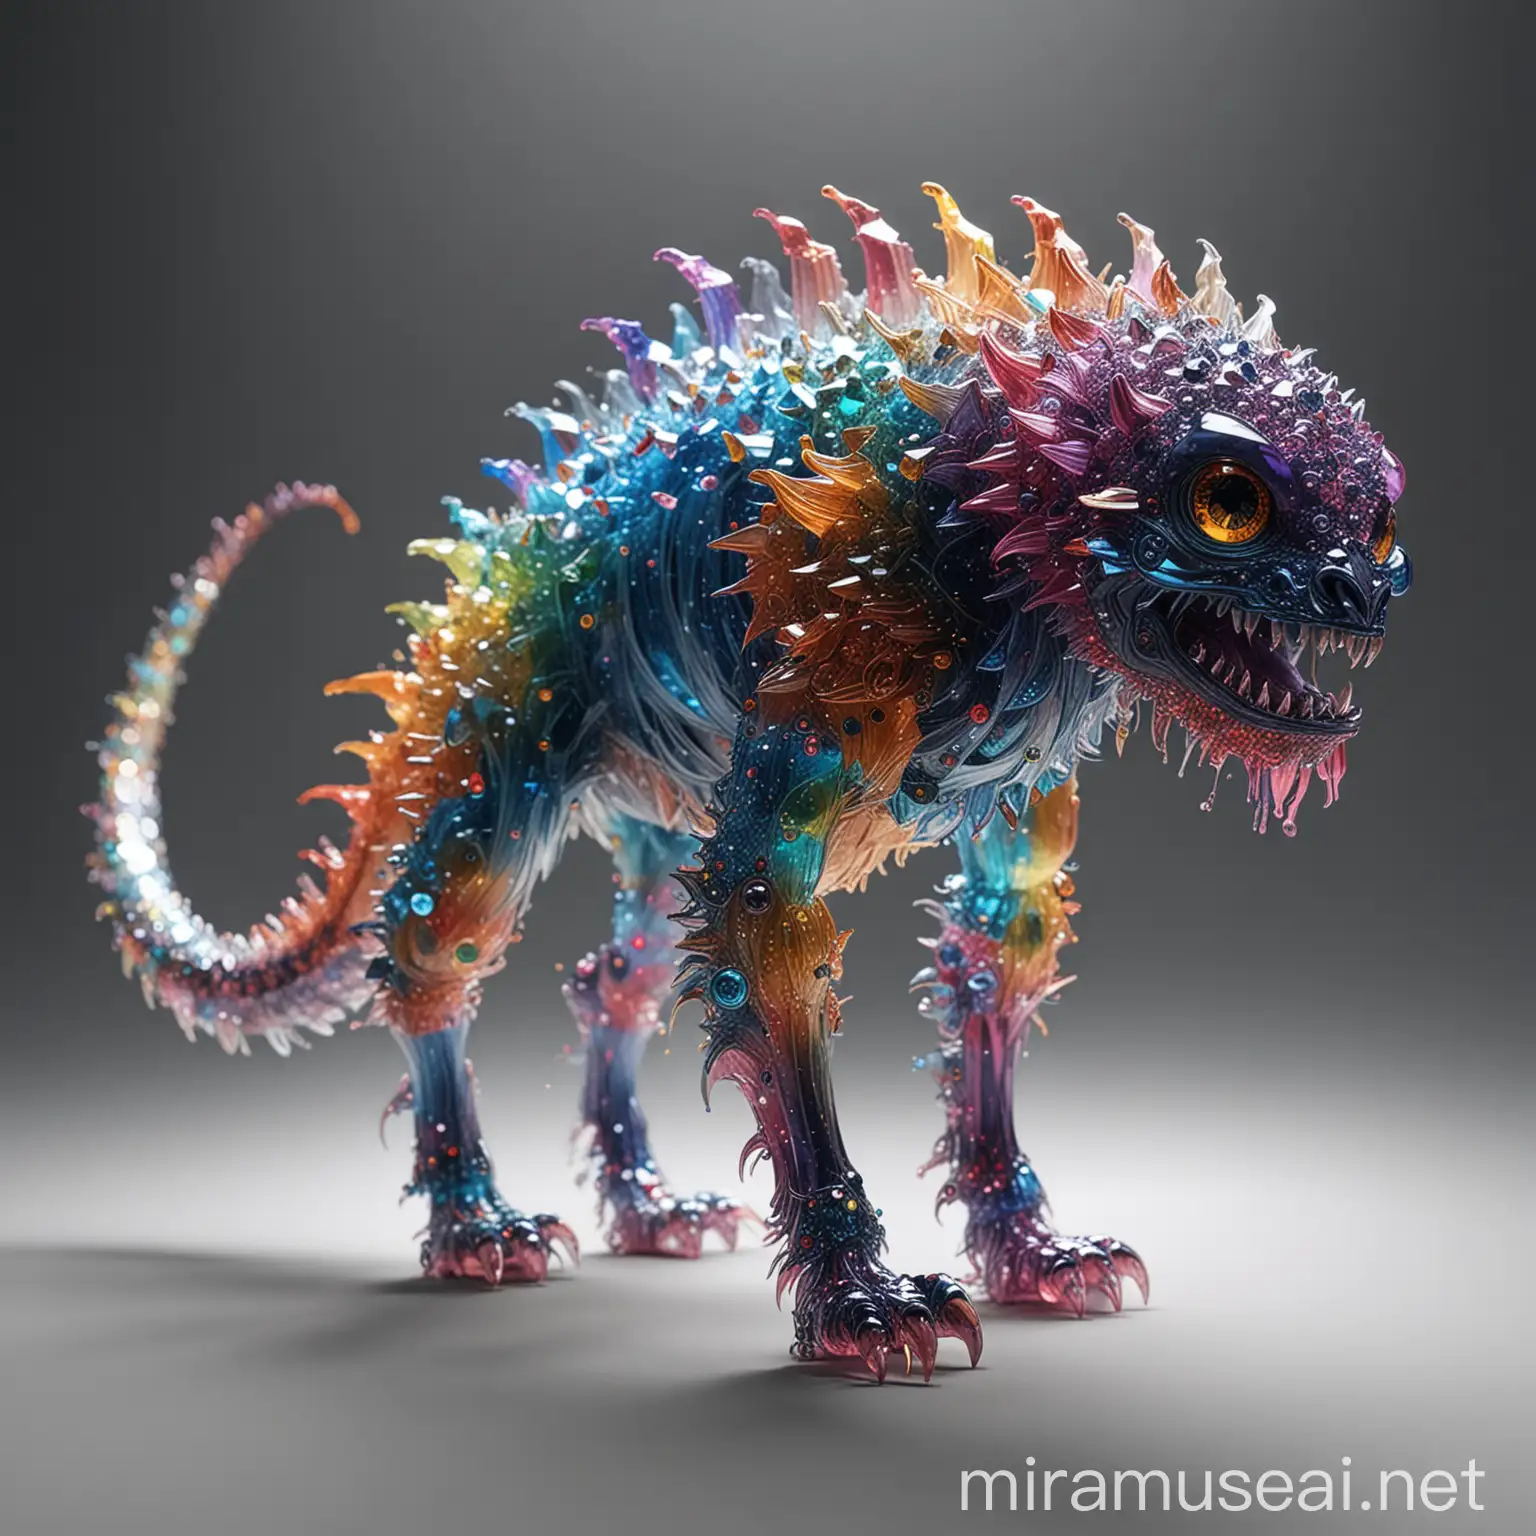 Colorful Crystal Monster with Sparkling Tail and Translucent Eyes